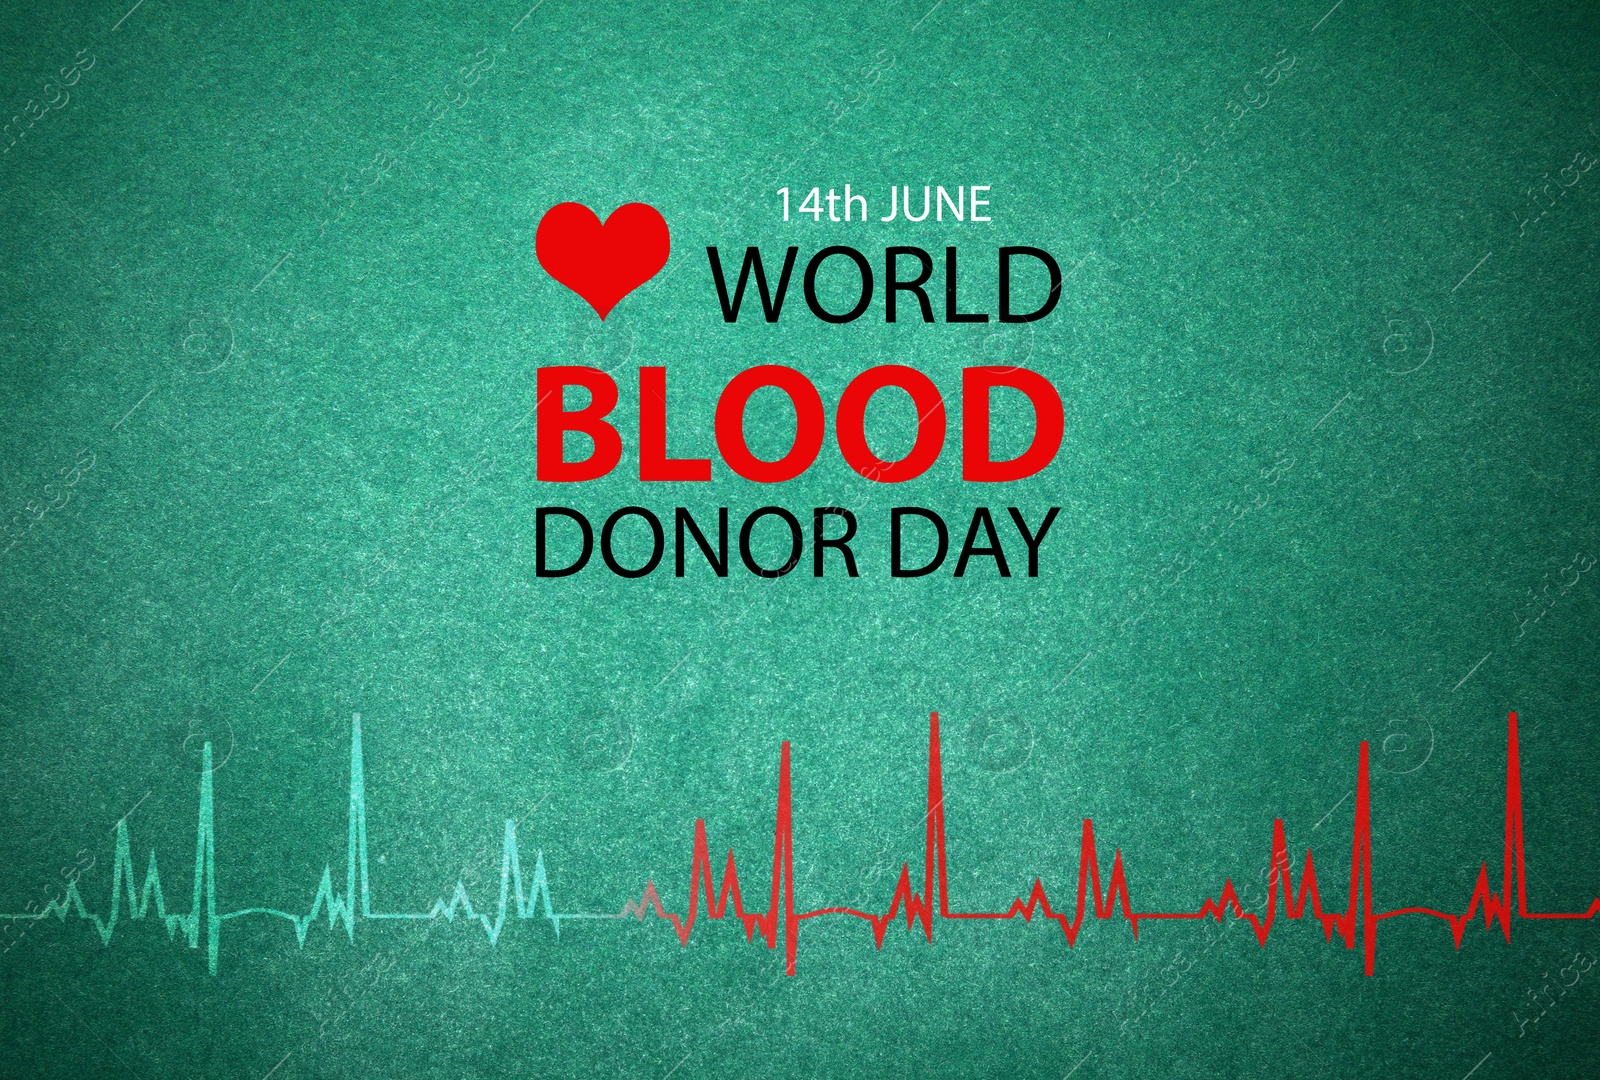 Image of Text 14th June World Blood Donor Day on green background